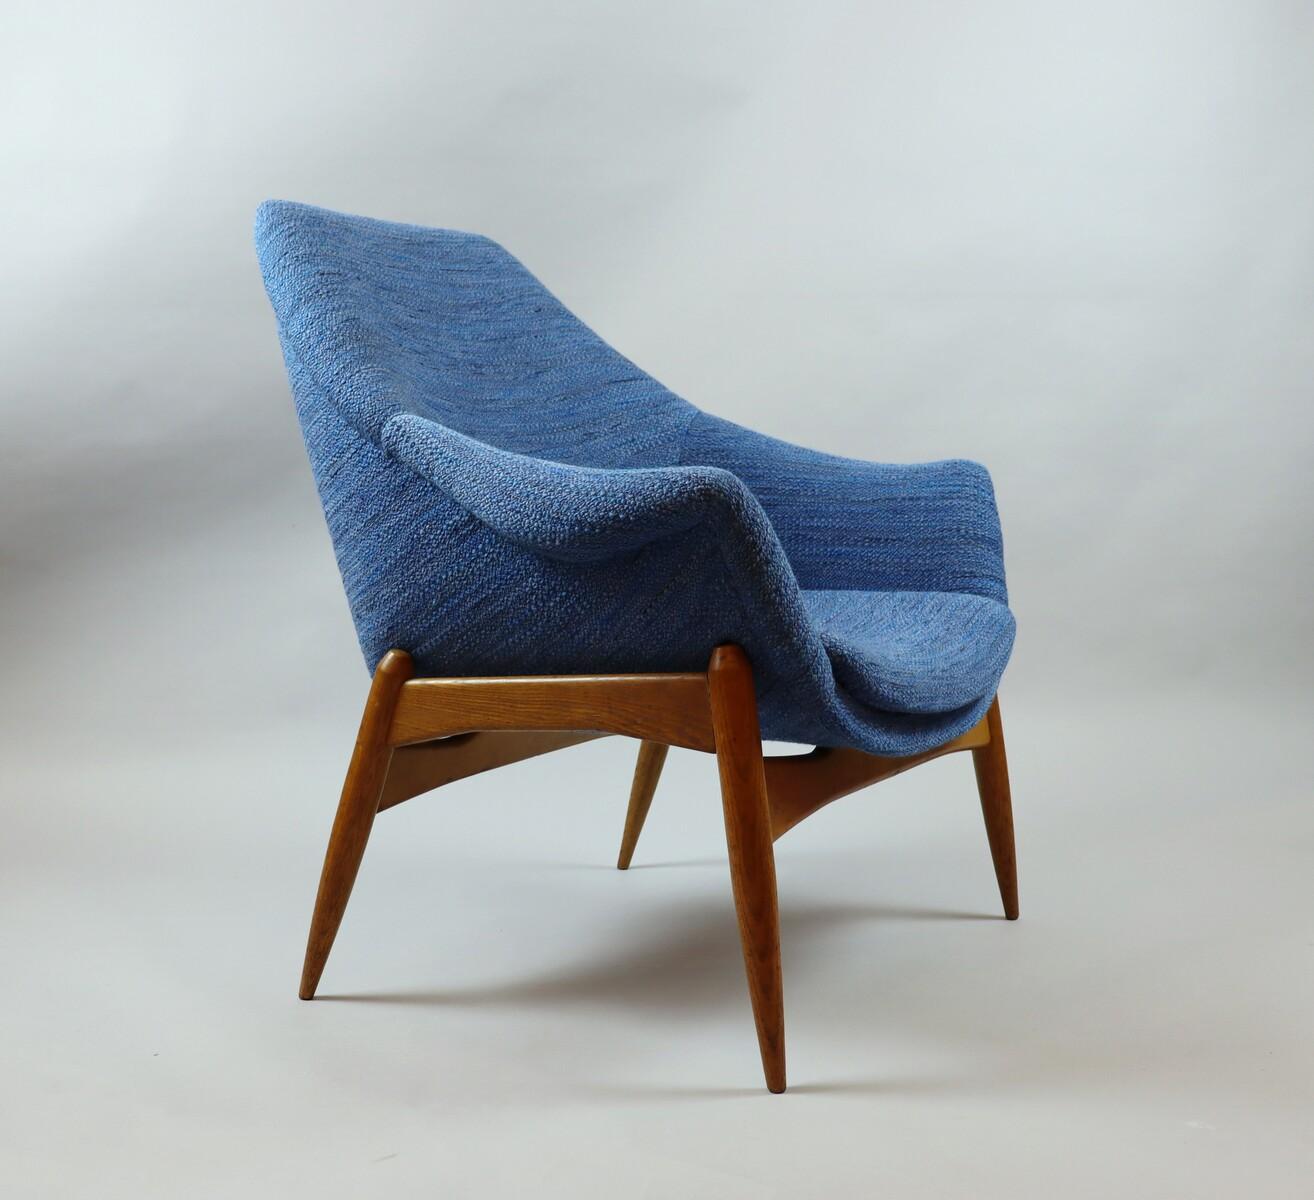 European Mid-Century Pair of Blue Fabric Armchairs by Julia Gaubek, Hungary, 1950s For Sale